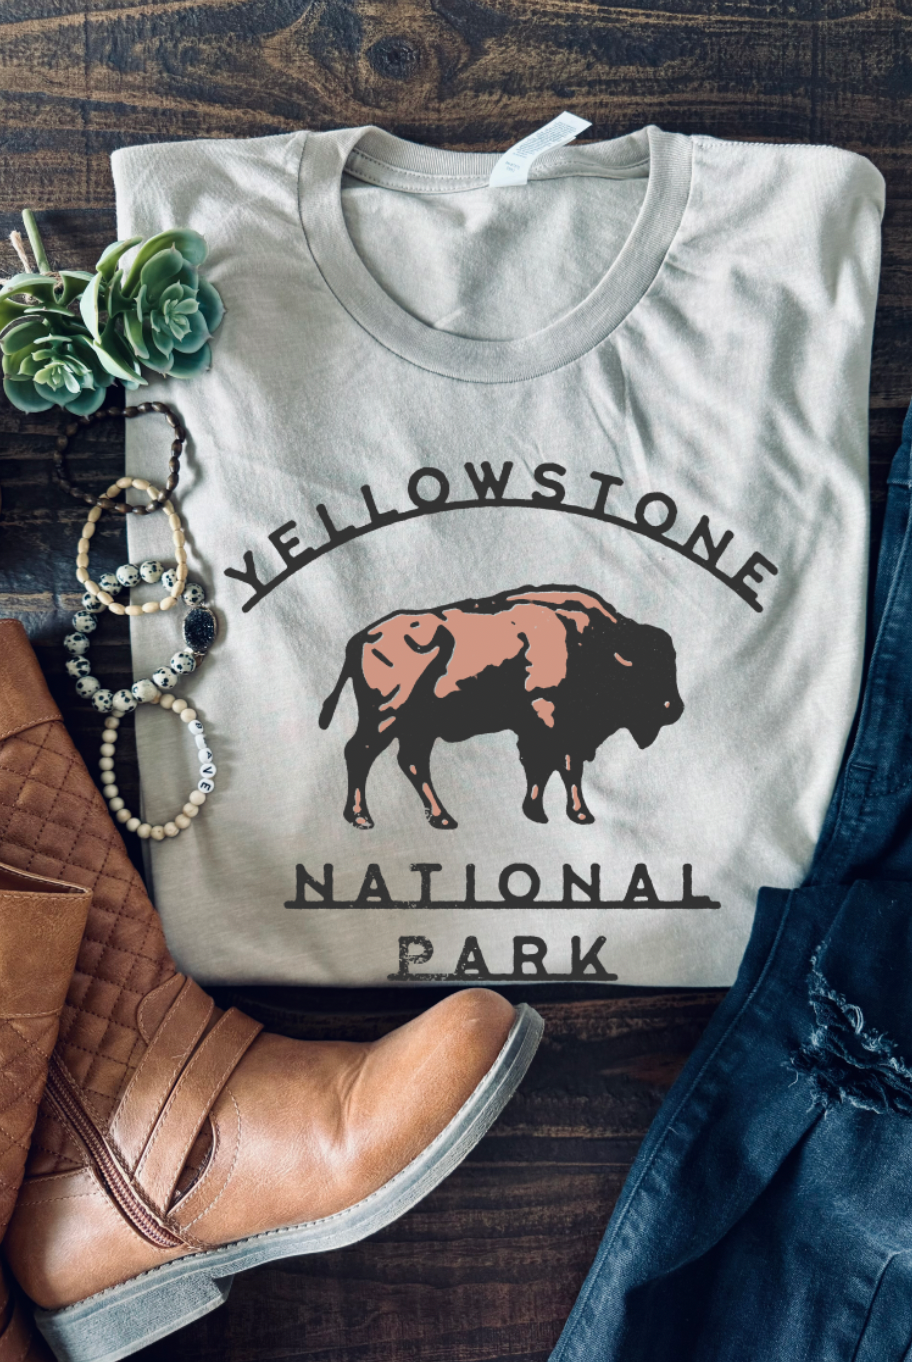 Yellowstone National Park Vintage Country Western Girl Tshirt. Bella and Canvas. Hand made and shipped from Texas. Color is Tan.